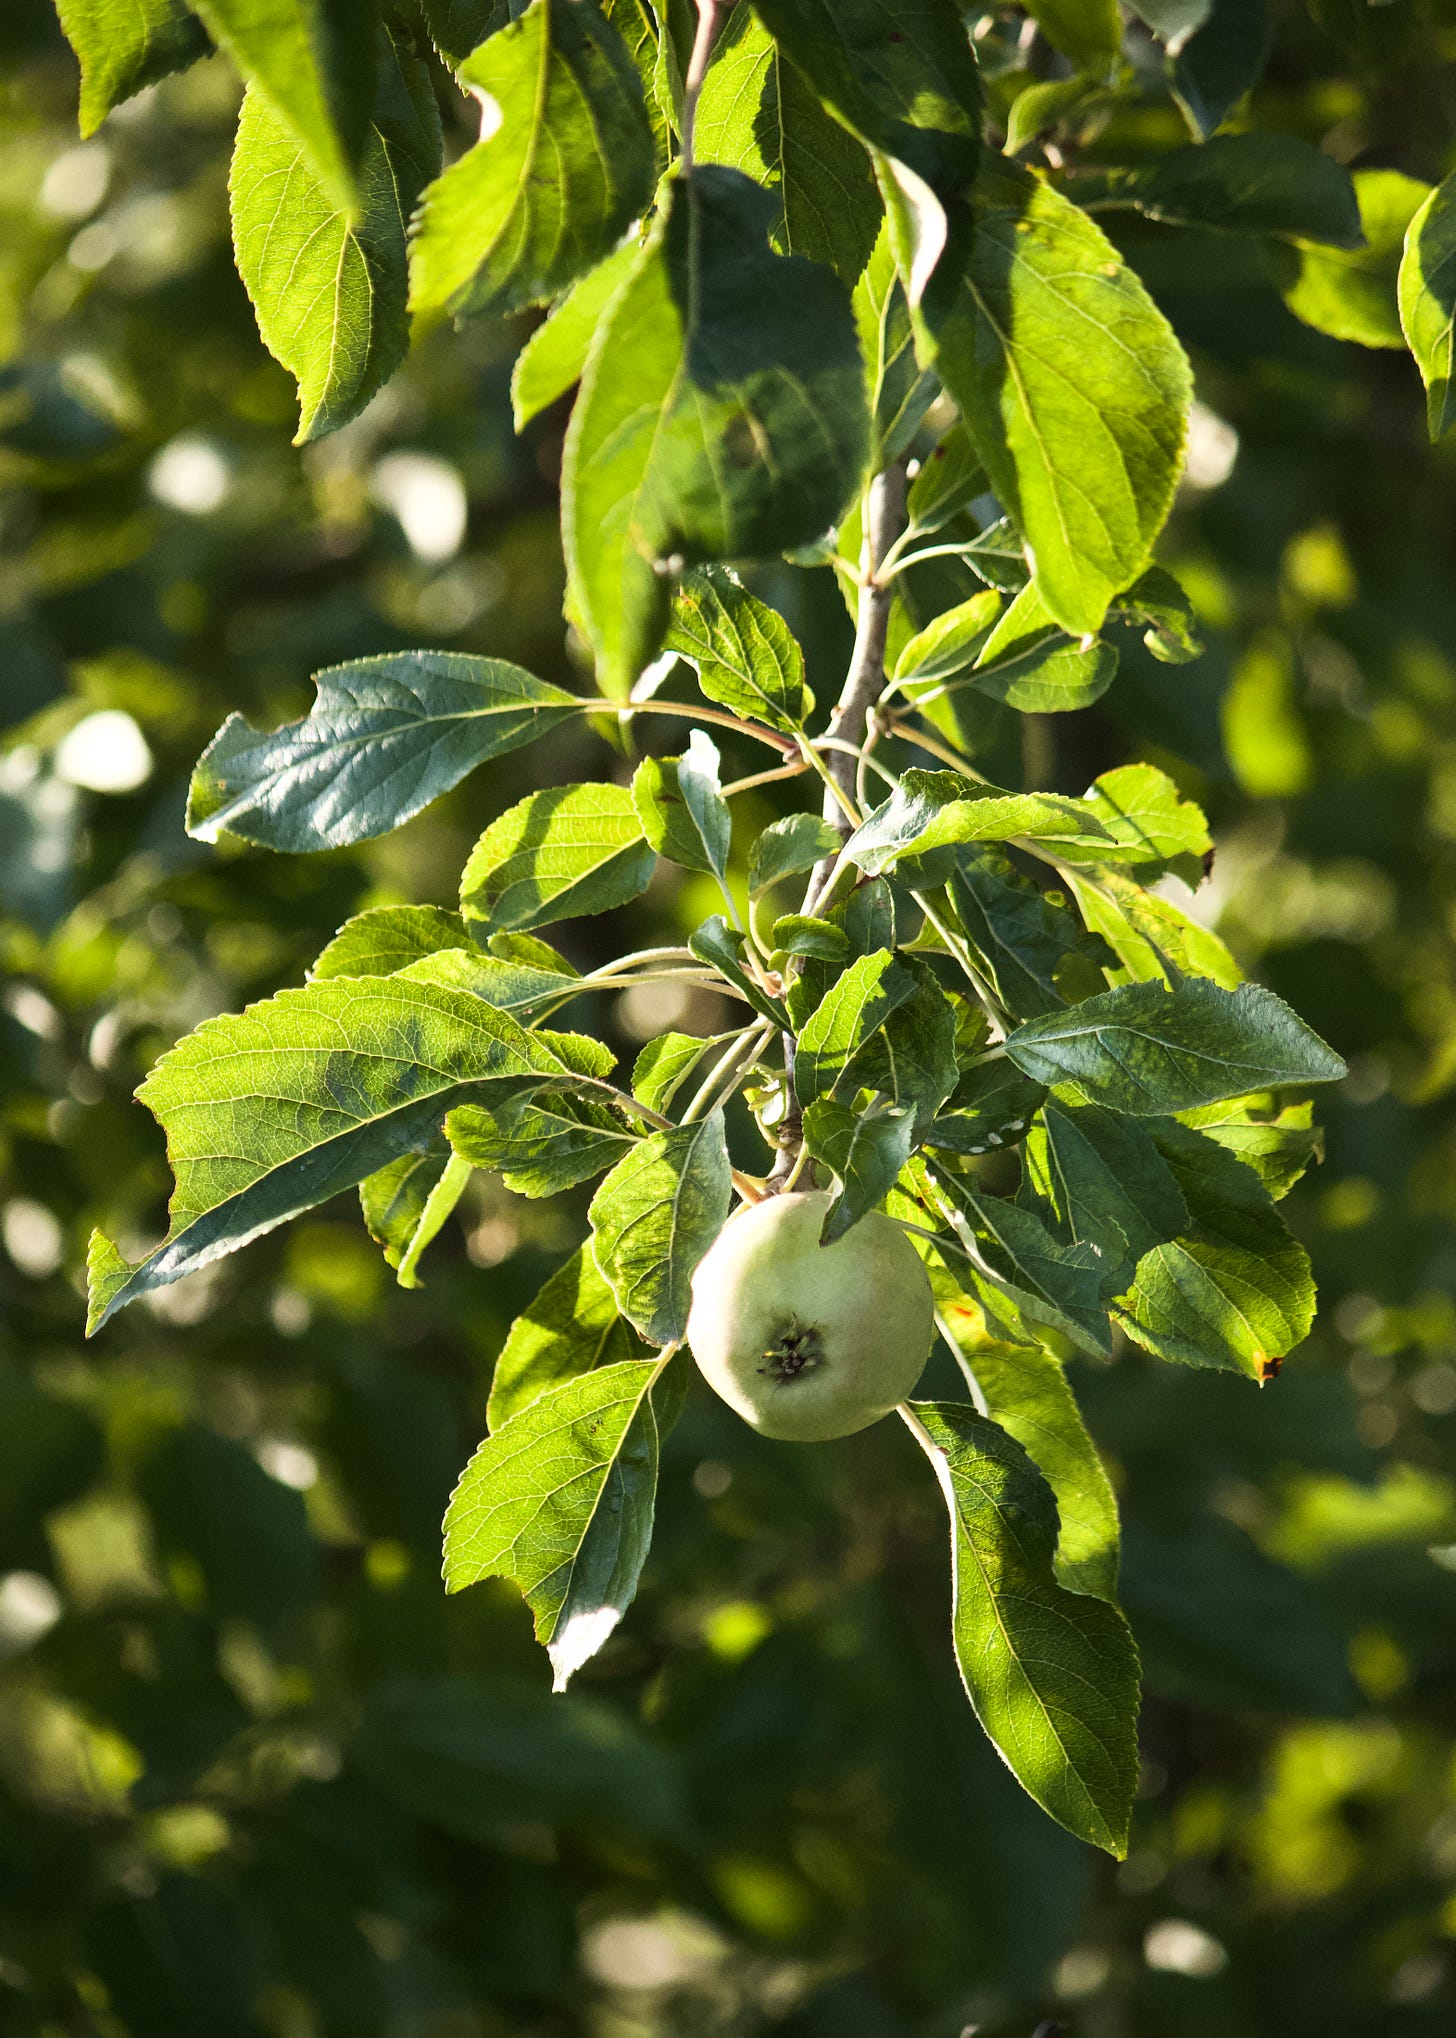 A branch from an Apple Tree hangs down from the top of the frame, weighed down by the weight of young pale green apples. 